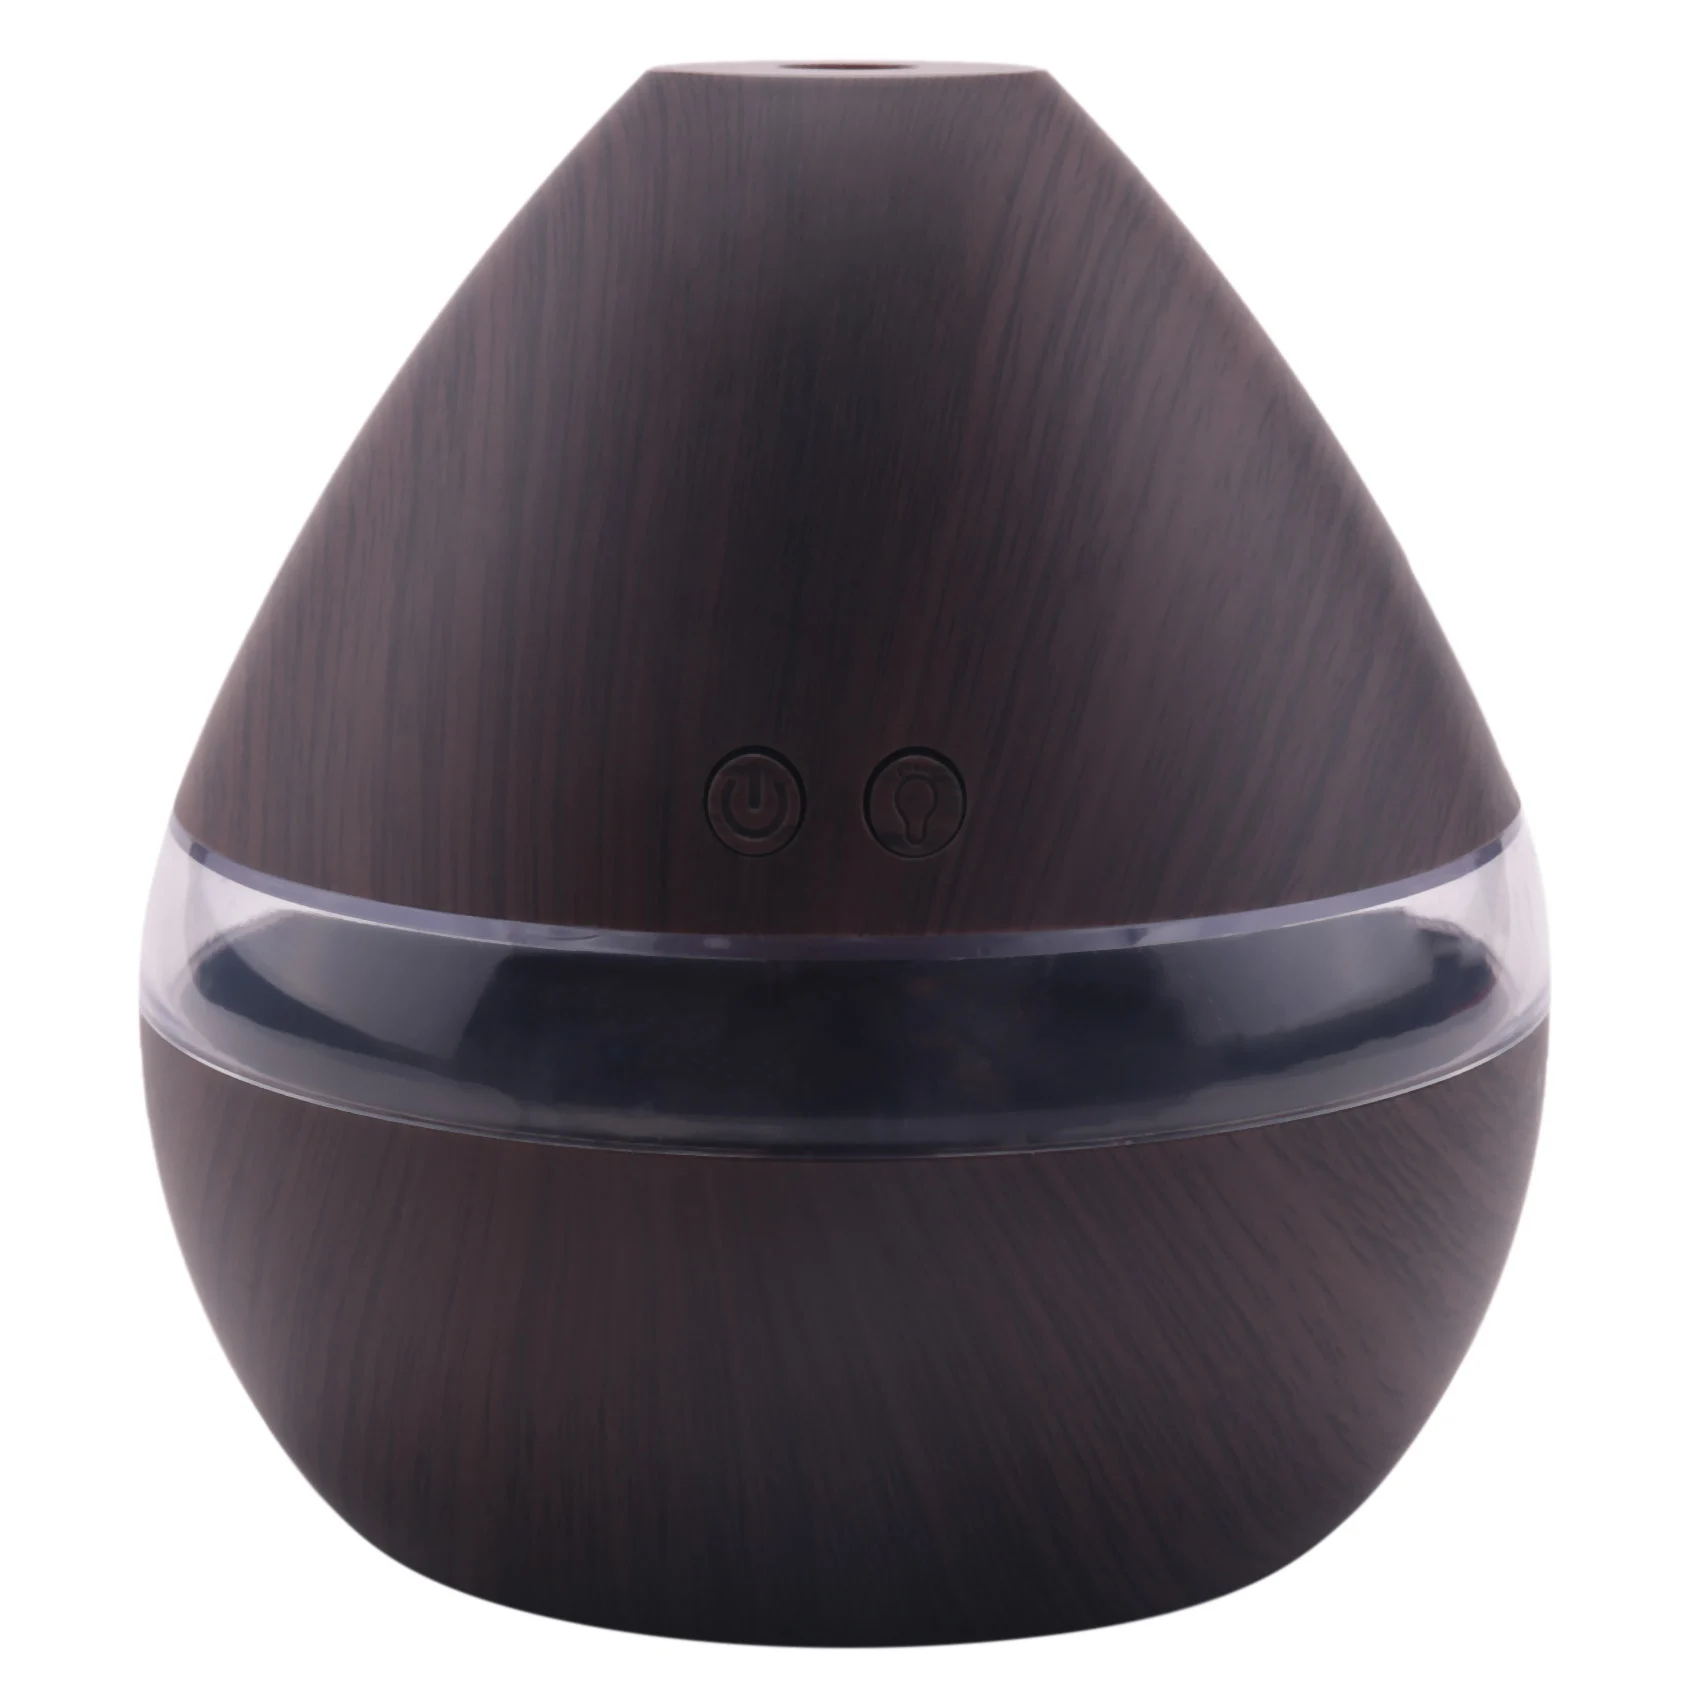 

Aromatherapy Essential Oil Diffuser 300Ml Wood Grain Aroma Diffuser With Timer Cool Mist Humidifier For Large Room,Home,Baby